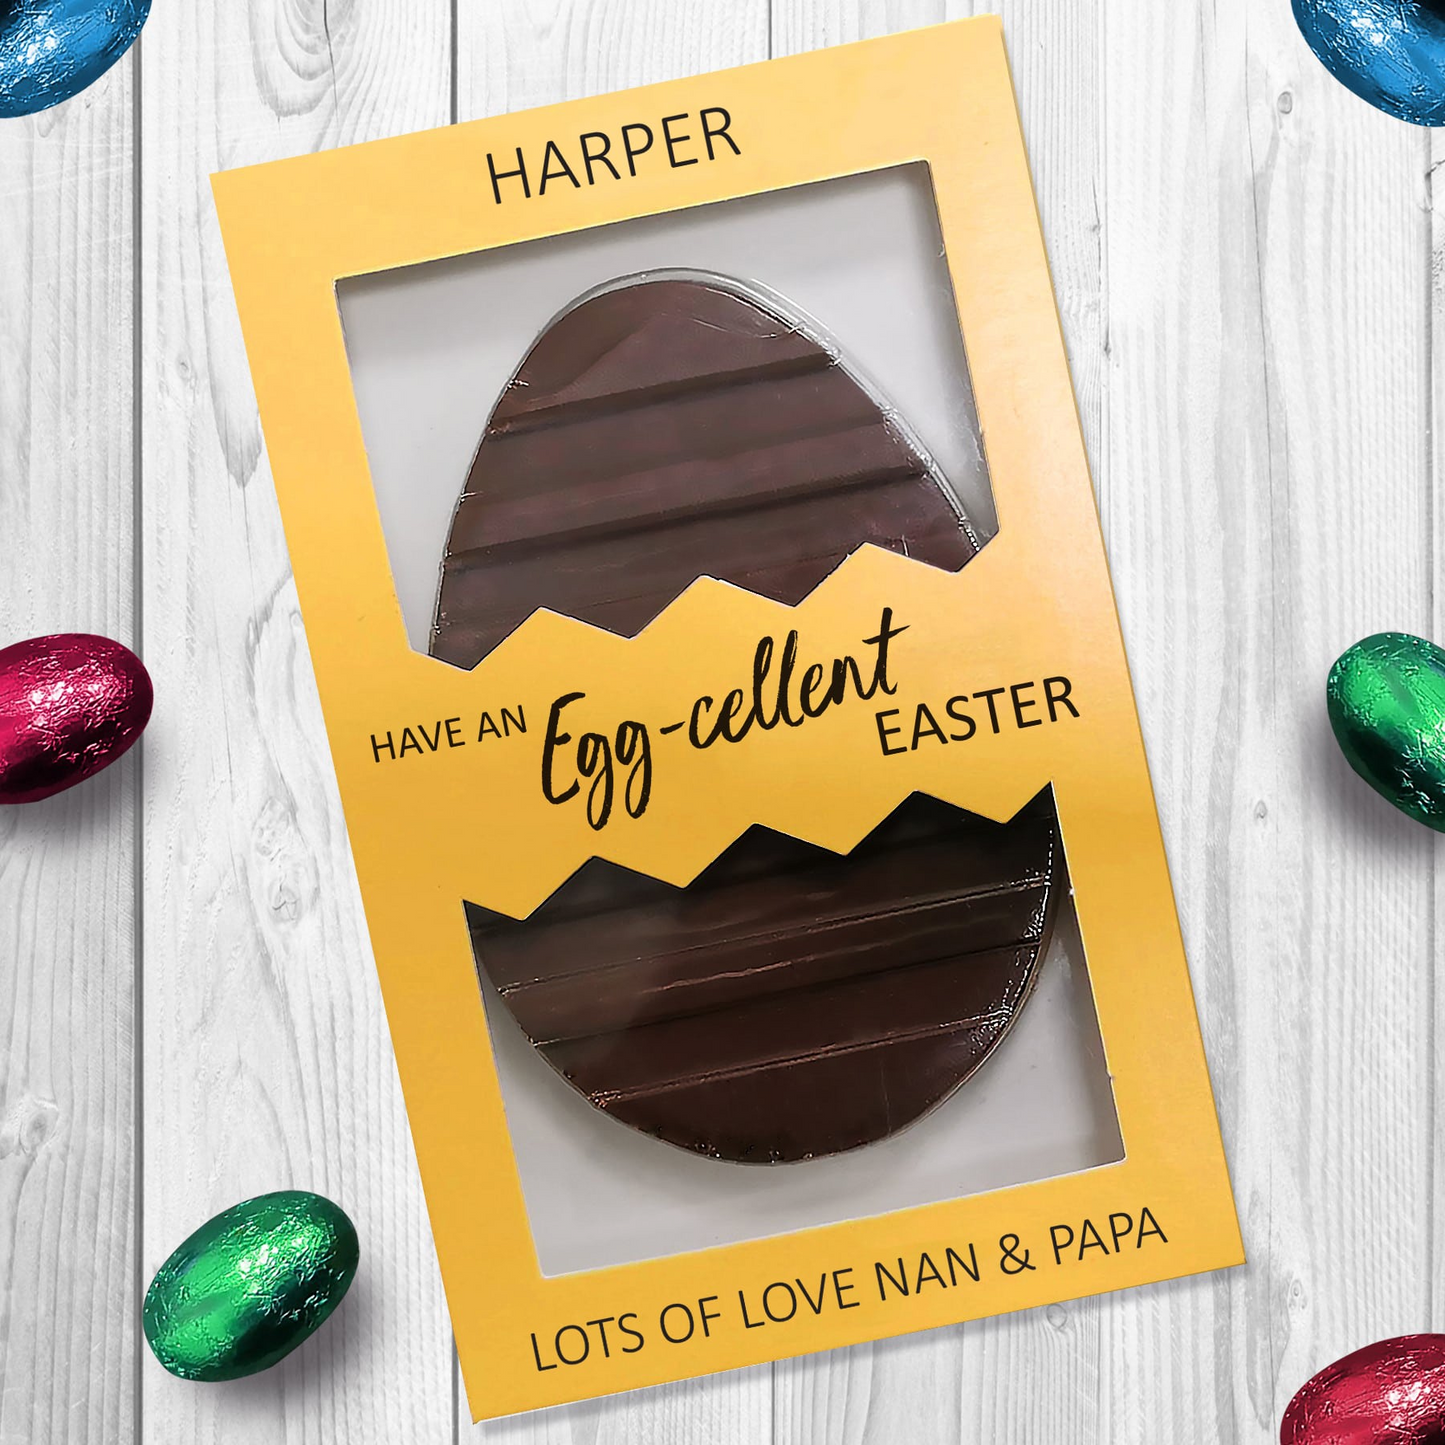 Personalised Letterbox Chocolate Easter Egg – Egg-cellent Easter